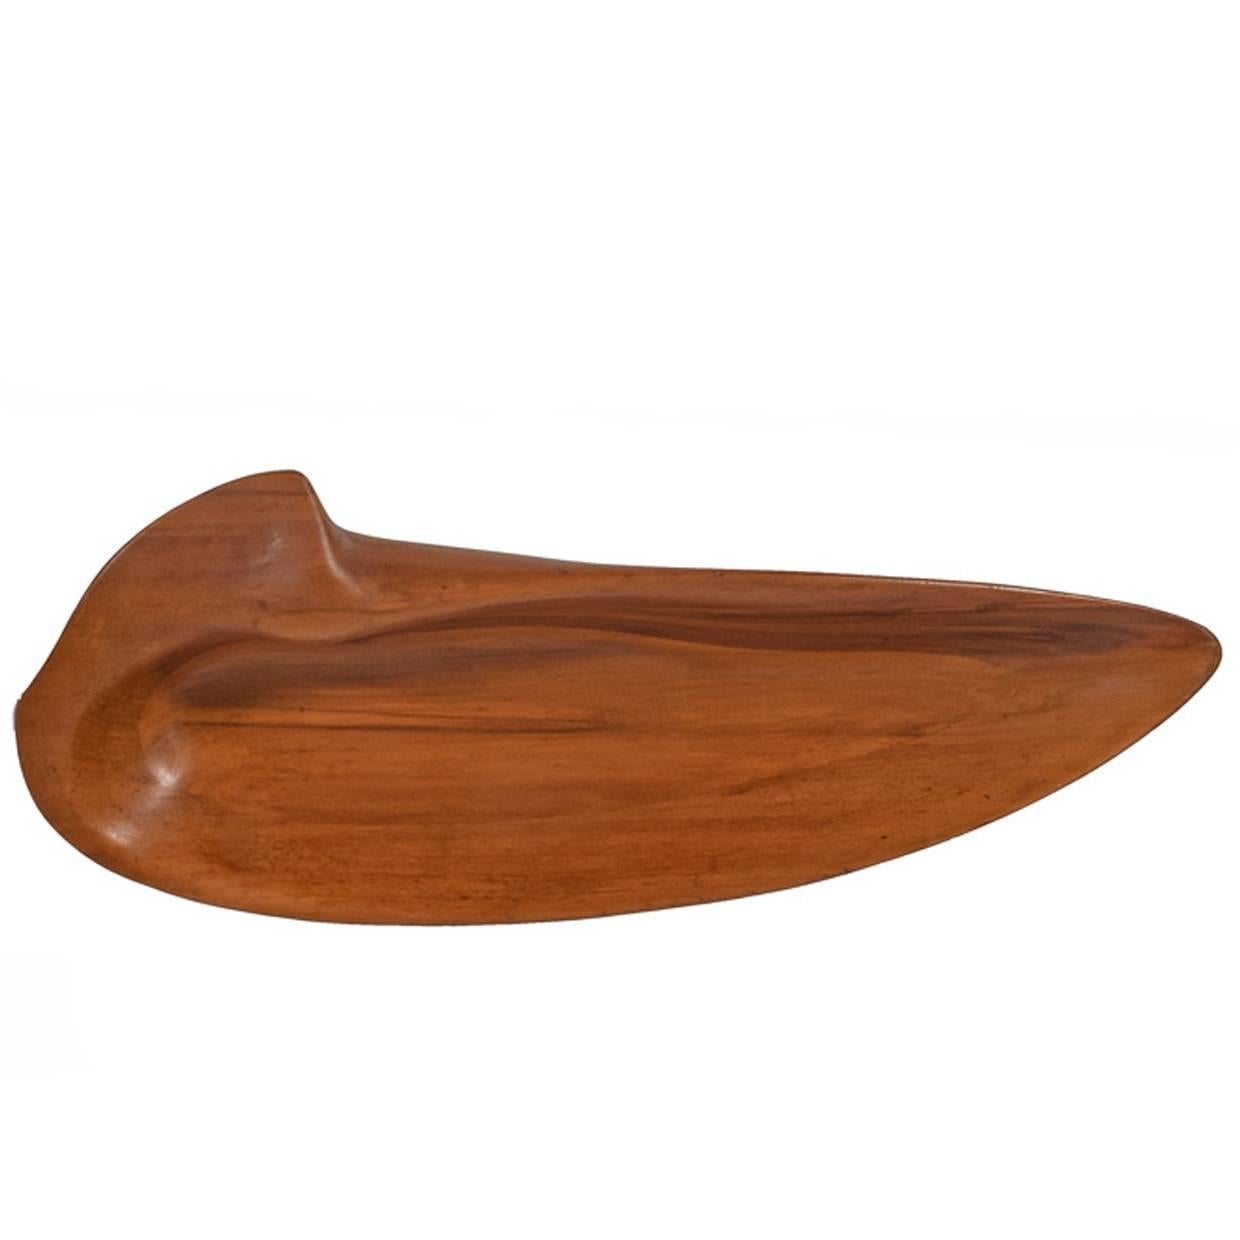 Wooden Bowl "Oceana" Design by Russell Wright for Klise For Sale